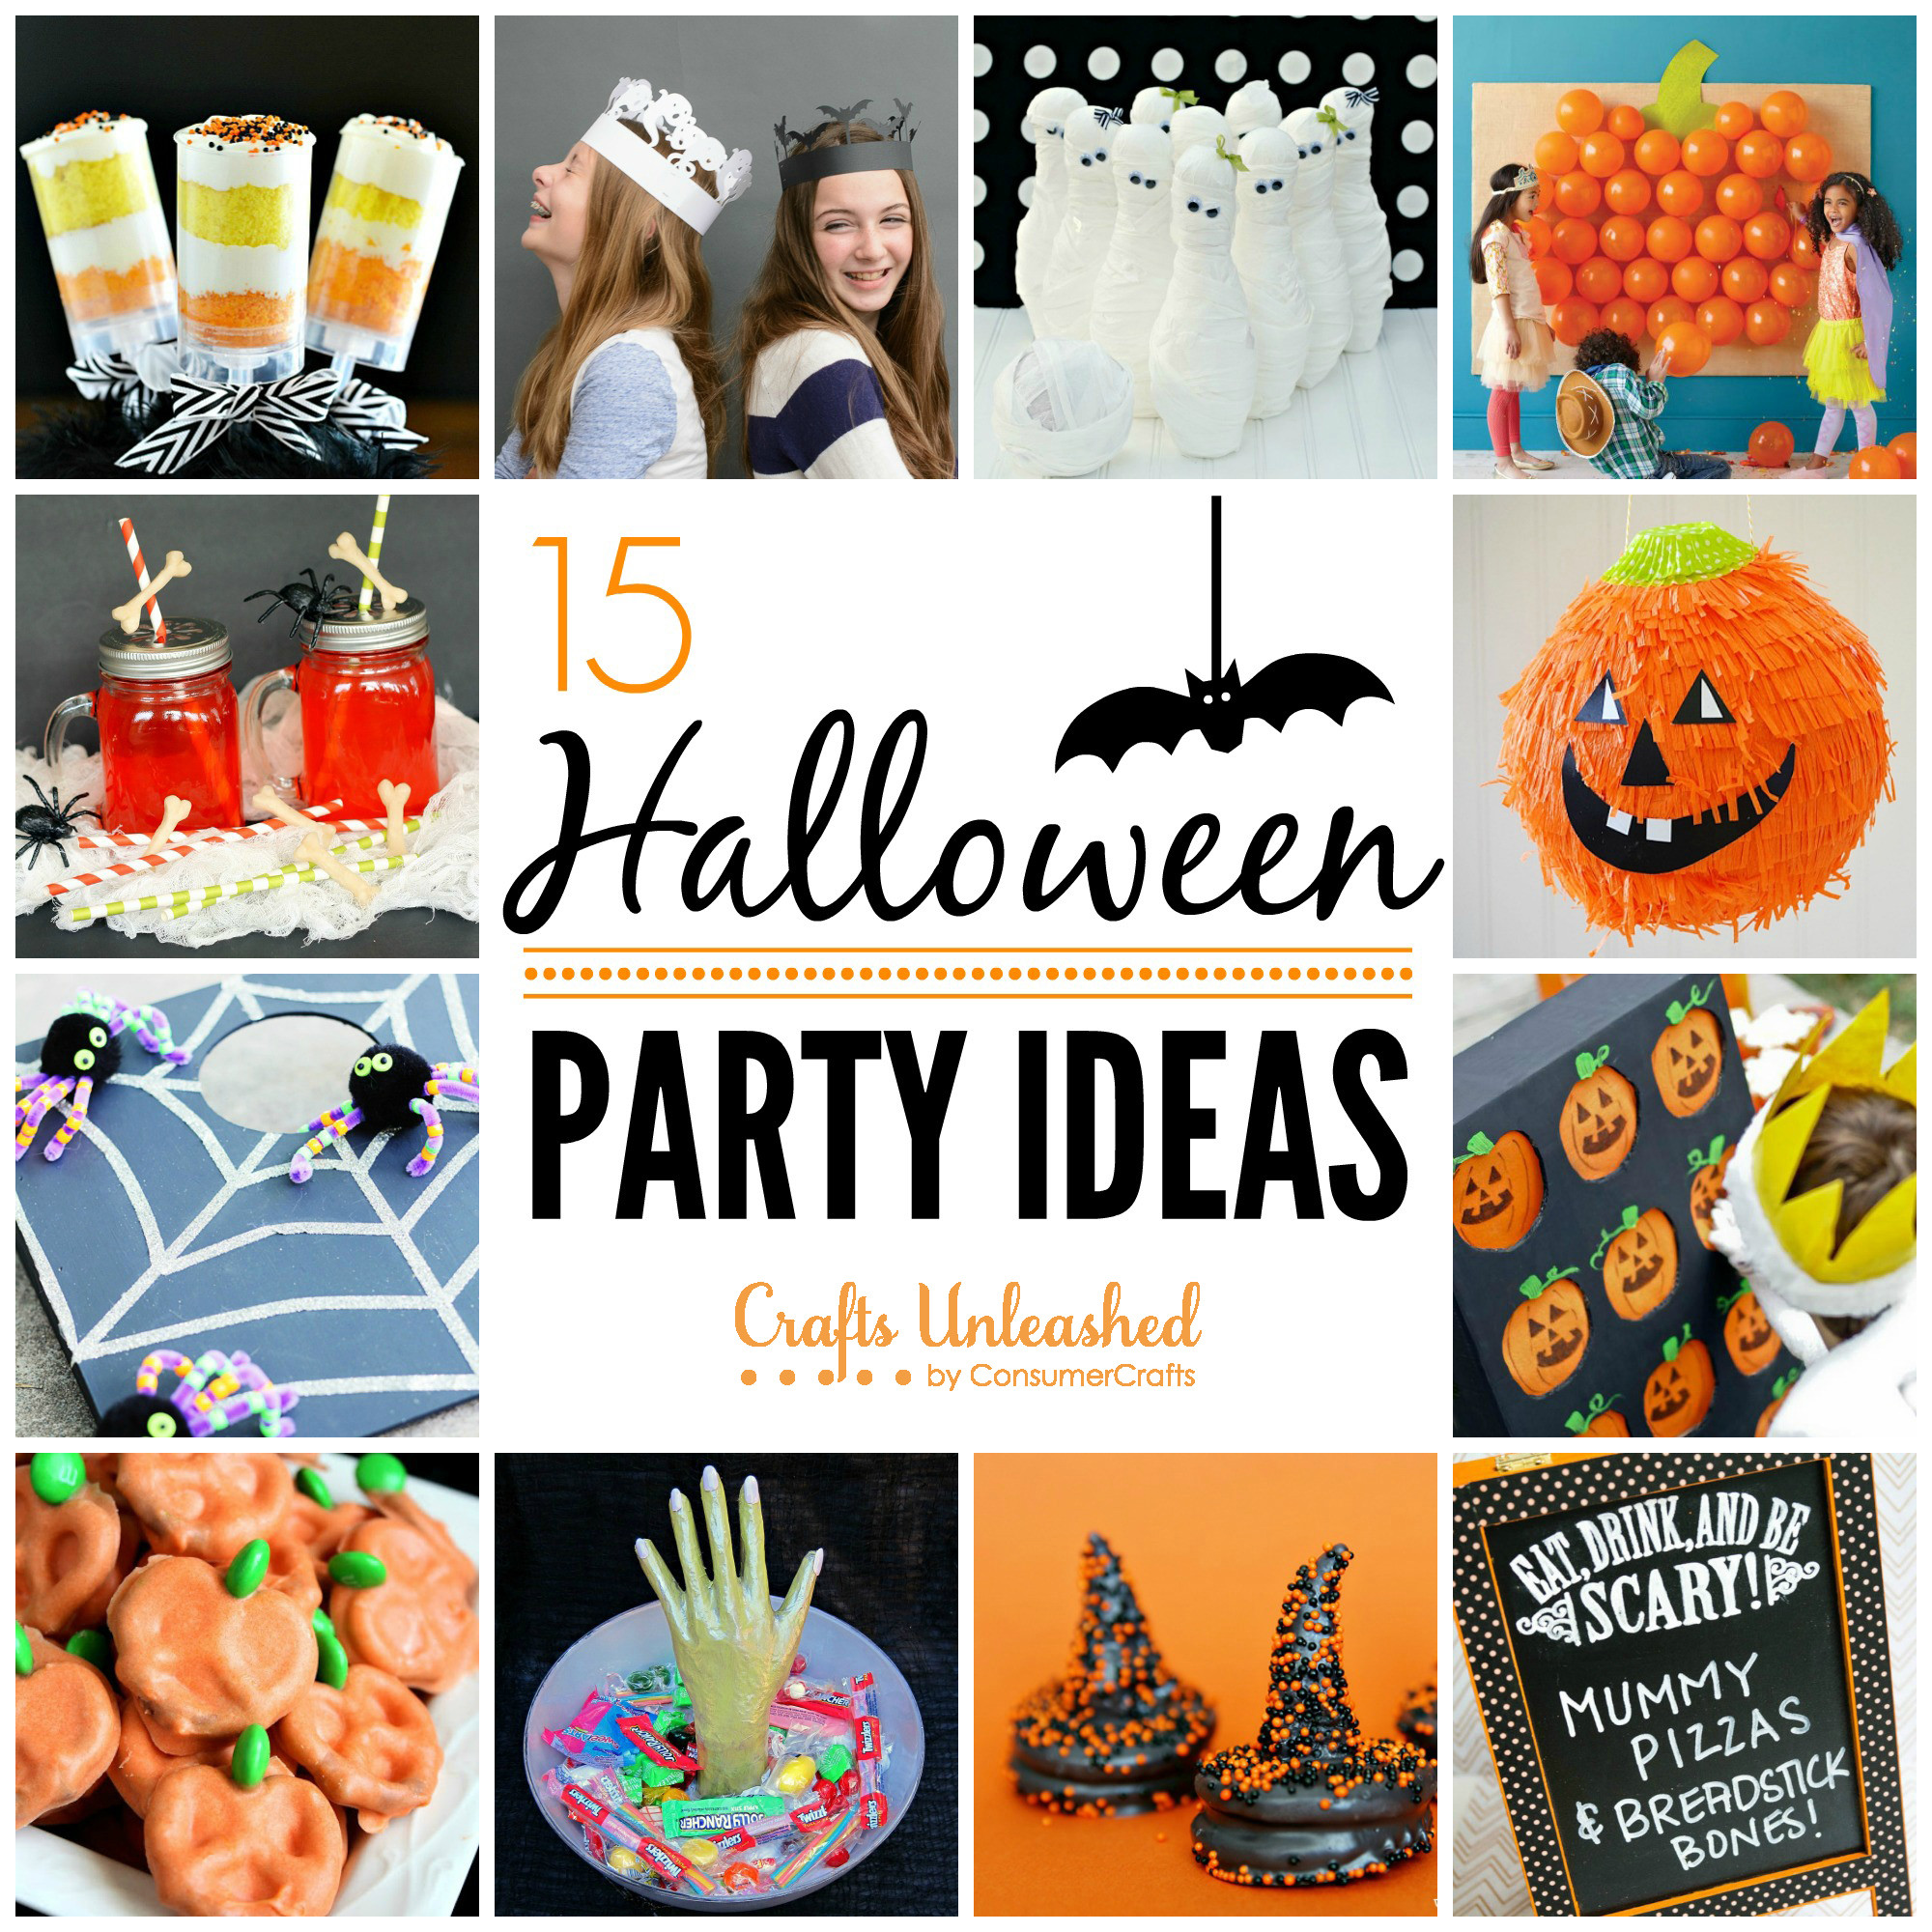 Halloween Party Ideas Diy
 Halloween Party Ideas Crafts Unleashed